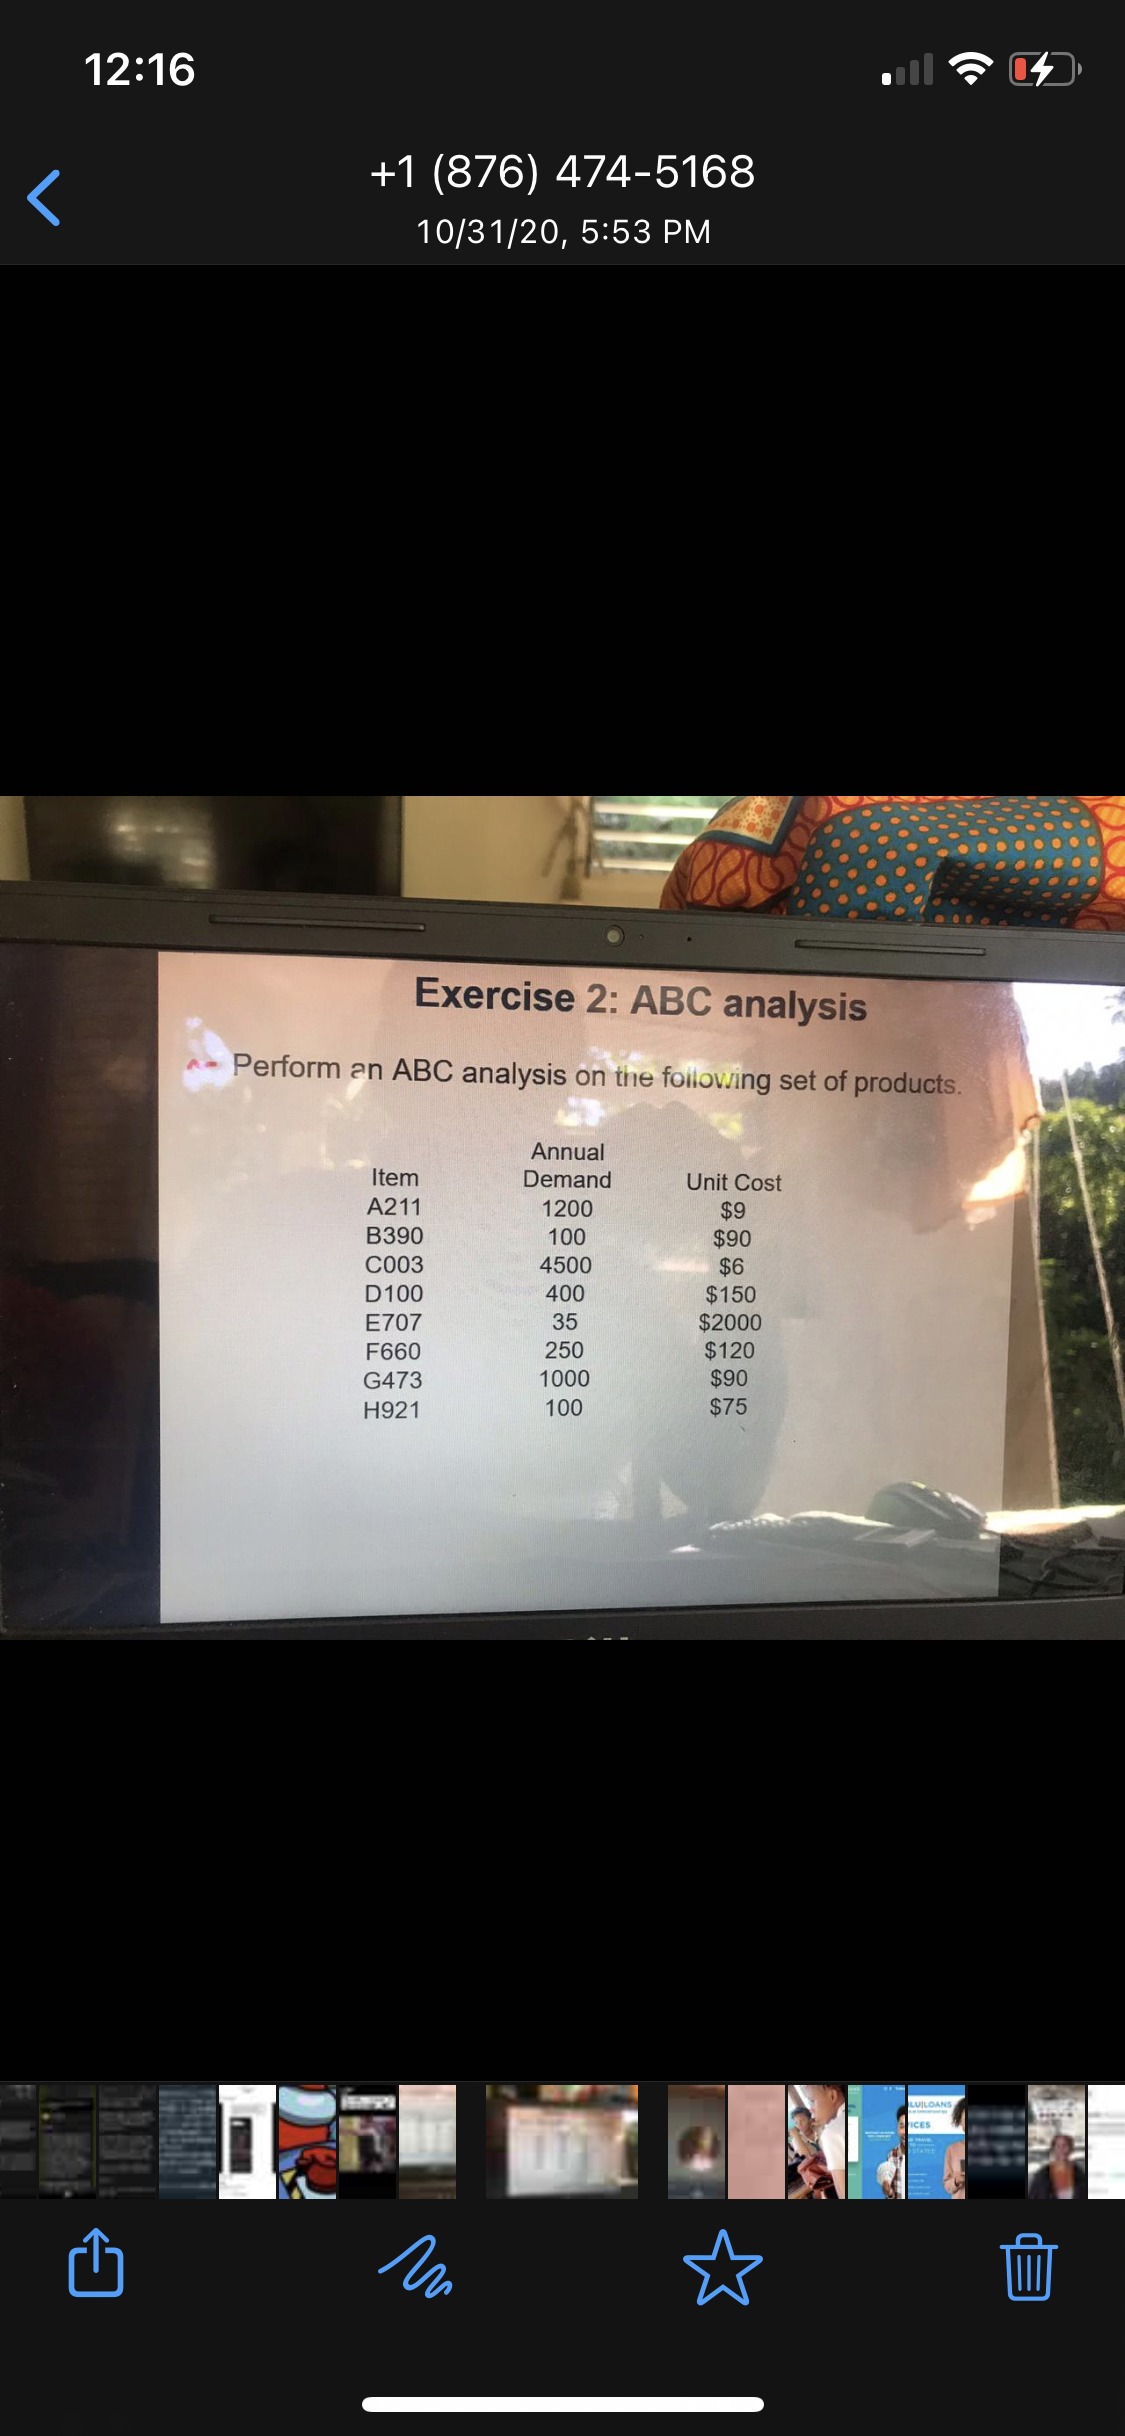 12:16
+1 (876) 474-5168
10/31/20, 5:53 PM
Exercise 2: ABC analysis
Perform an ABC analysis on the foilowing set of products.
Annual
Item
Demand
Unit Cost
A211
1200
$9
$90
$6
$150
$2000
$120
$90
B390
100
C003
4500
D100
400
E707
35
F660
250
G473
1000
H921
100
$75
LUILOANS
ICES
